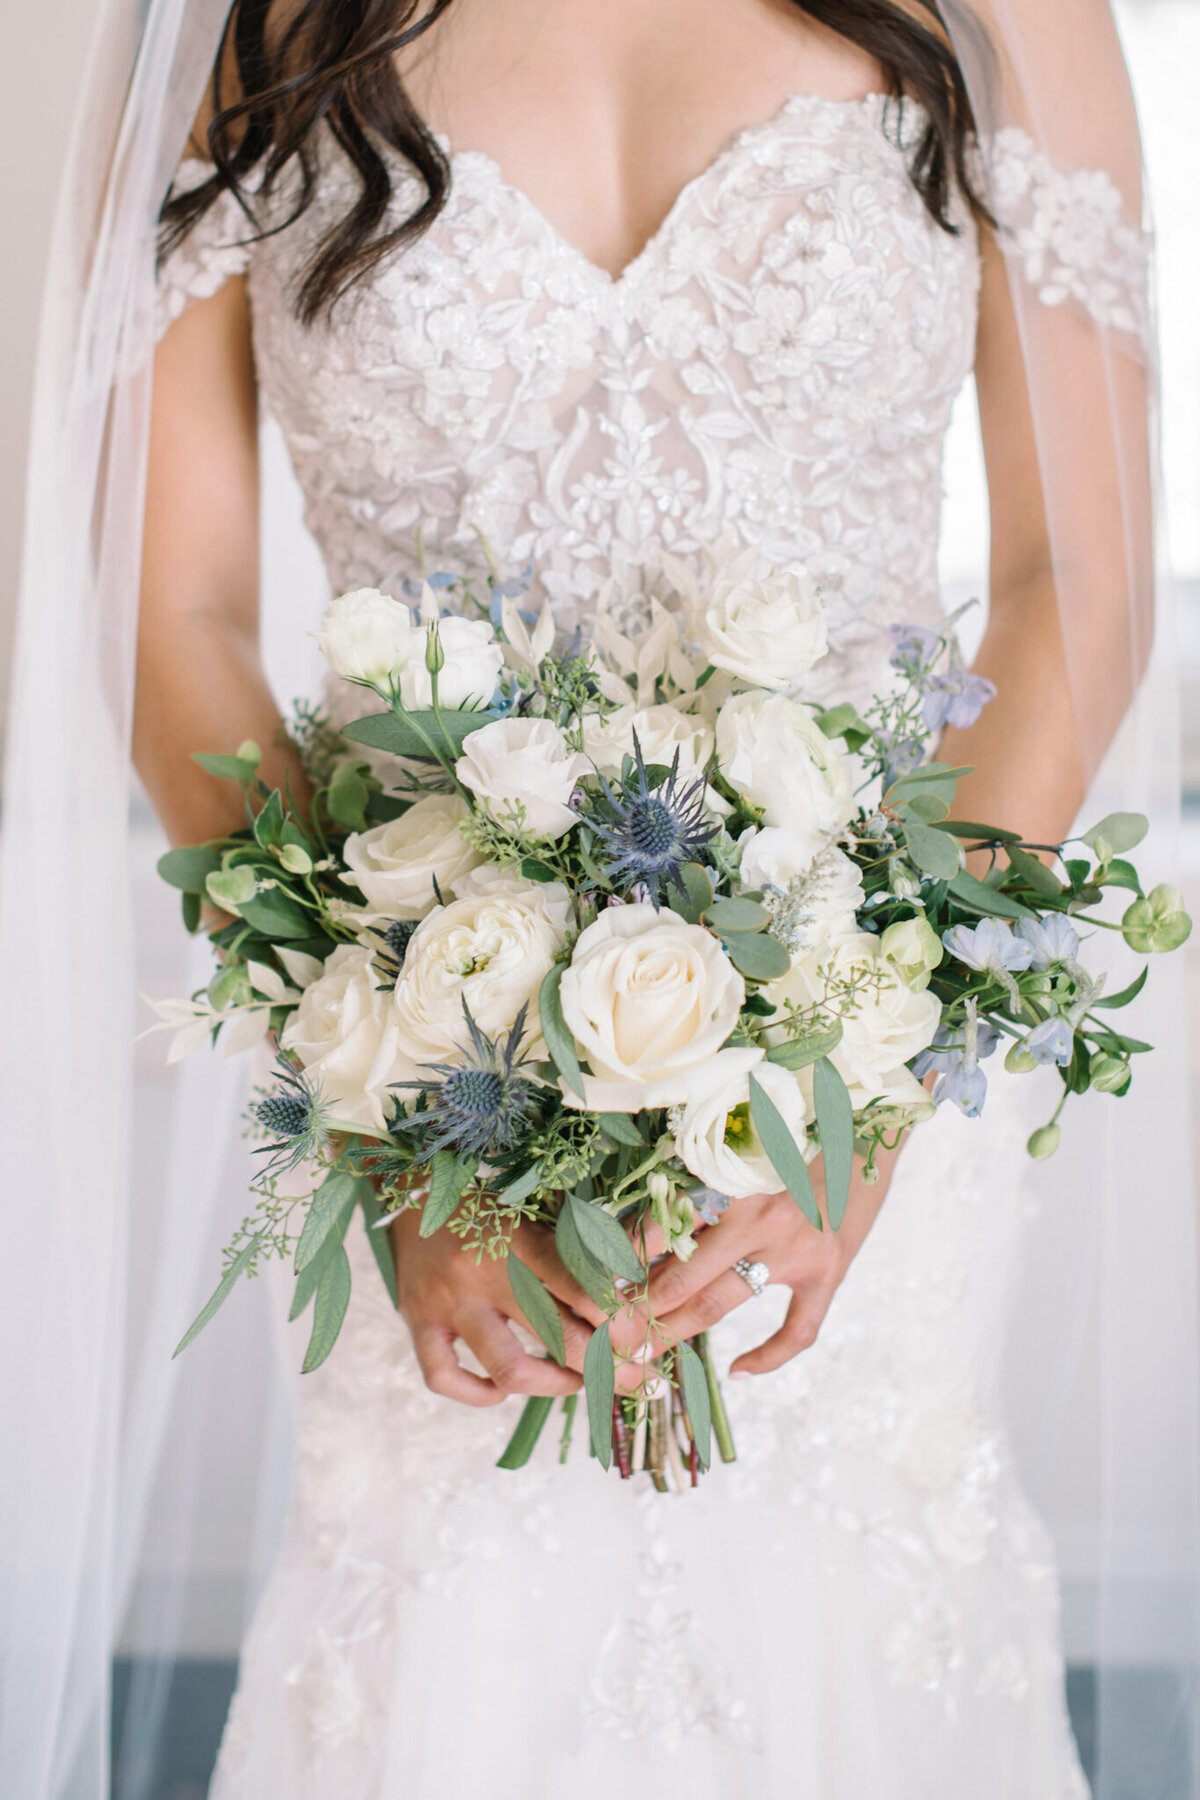 Classic and elegant bouquet  of white and blue by Bright and romantic orange, pink and white bouquet by Lovella Lifestyle, whimsical and romantic Edmonton wedding florist, featured on the Brontë Bride Vendor Guide.